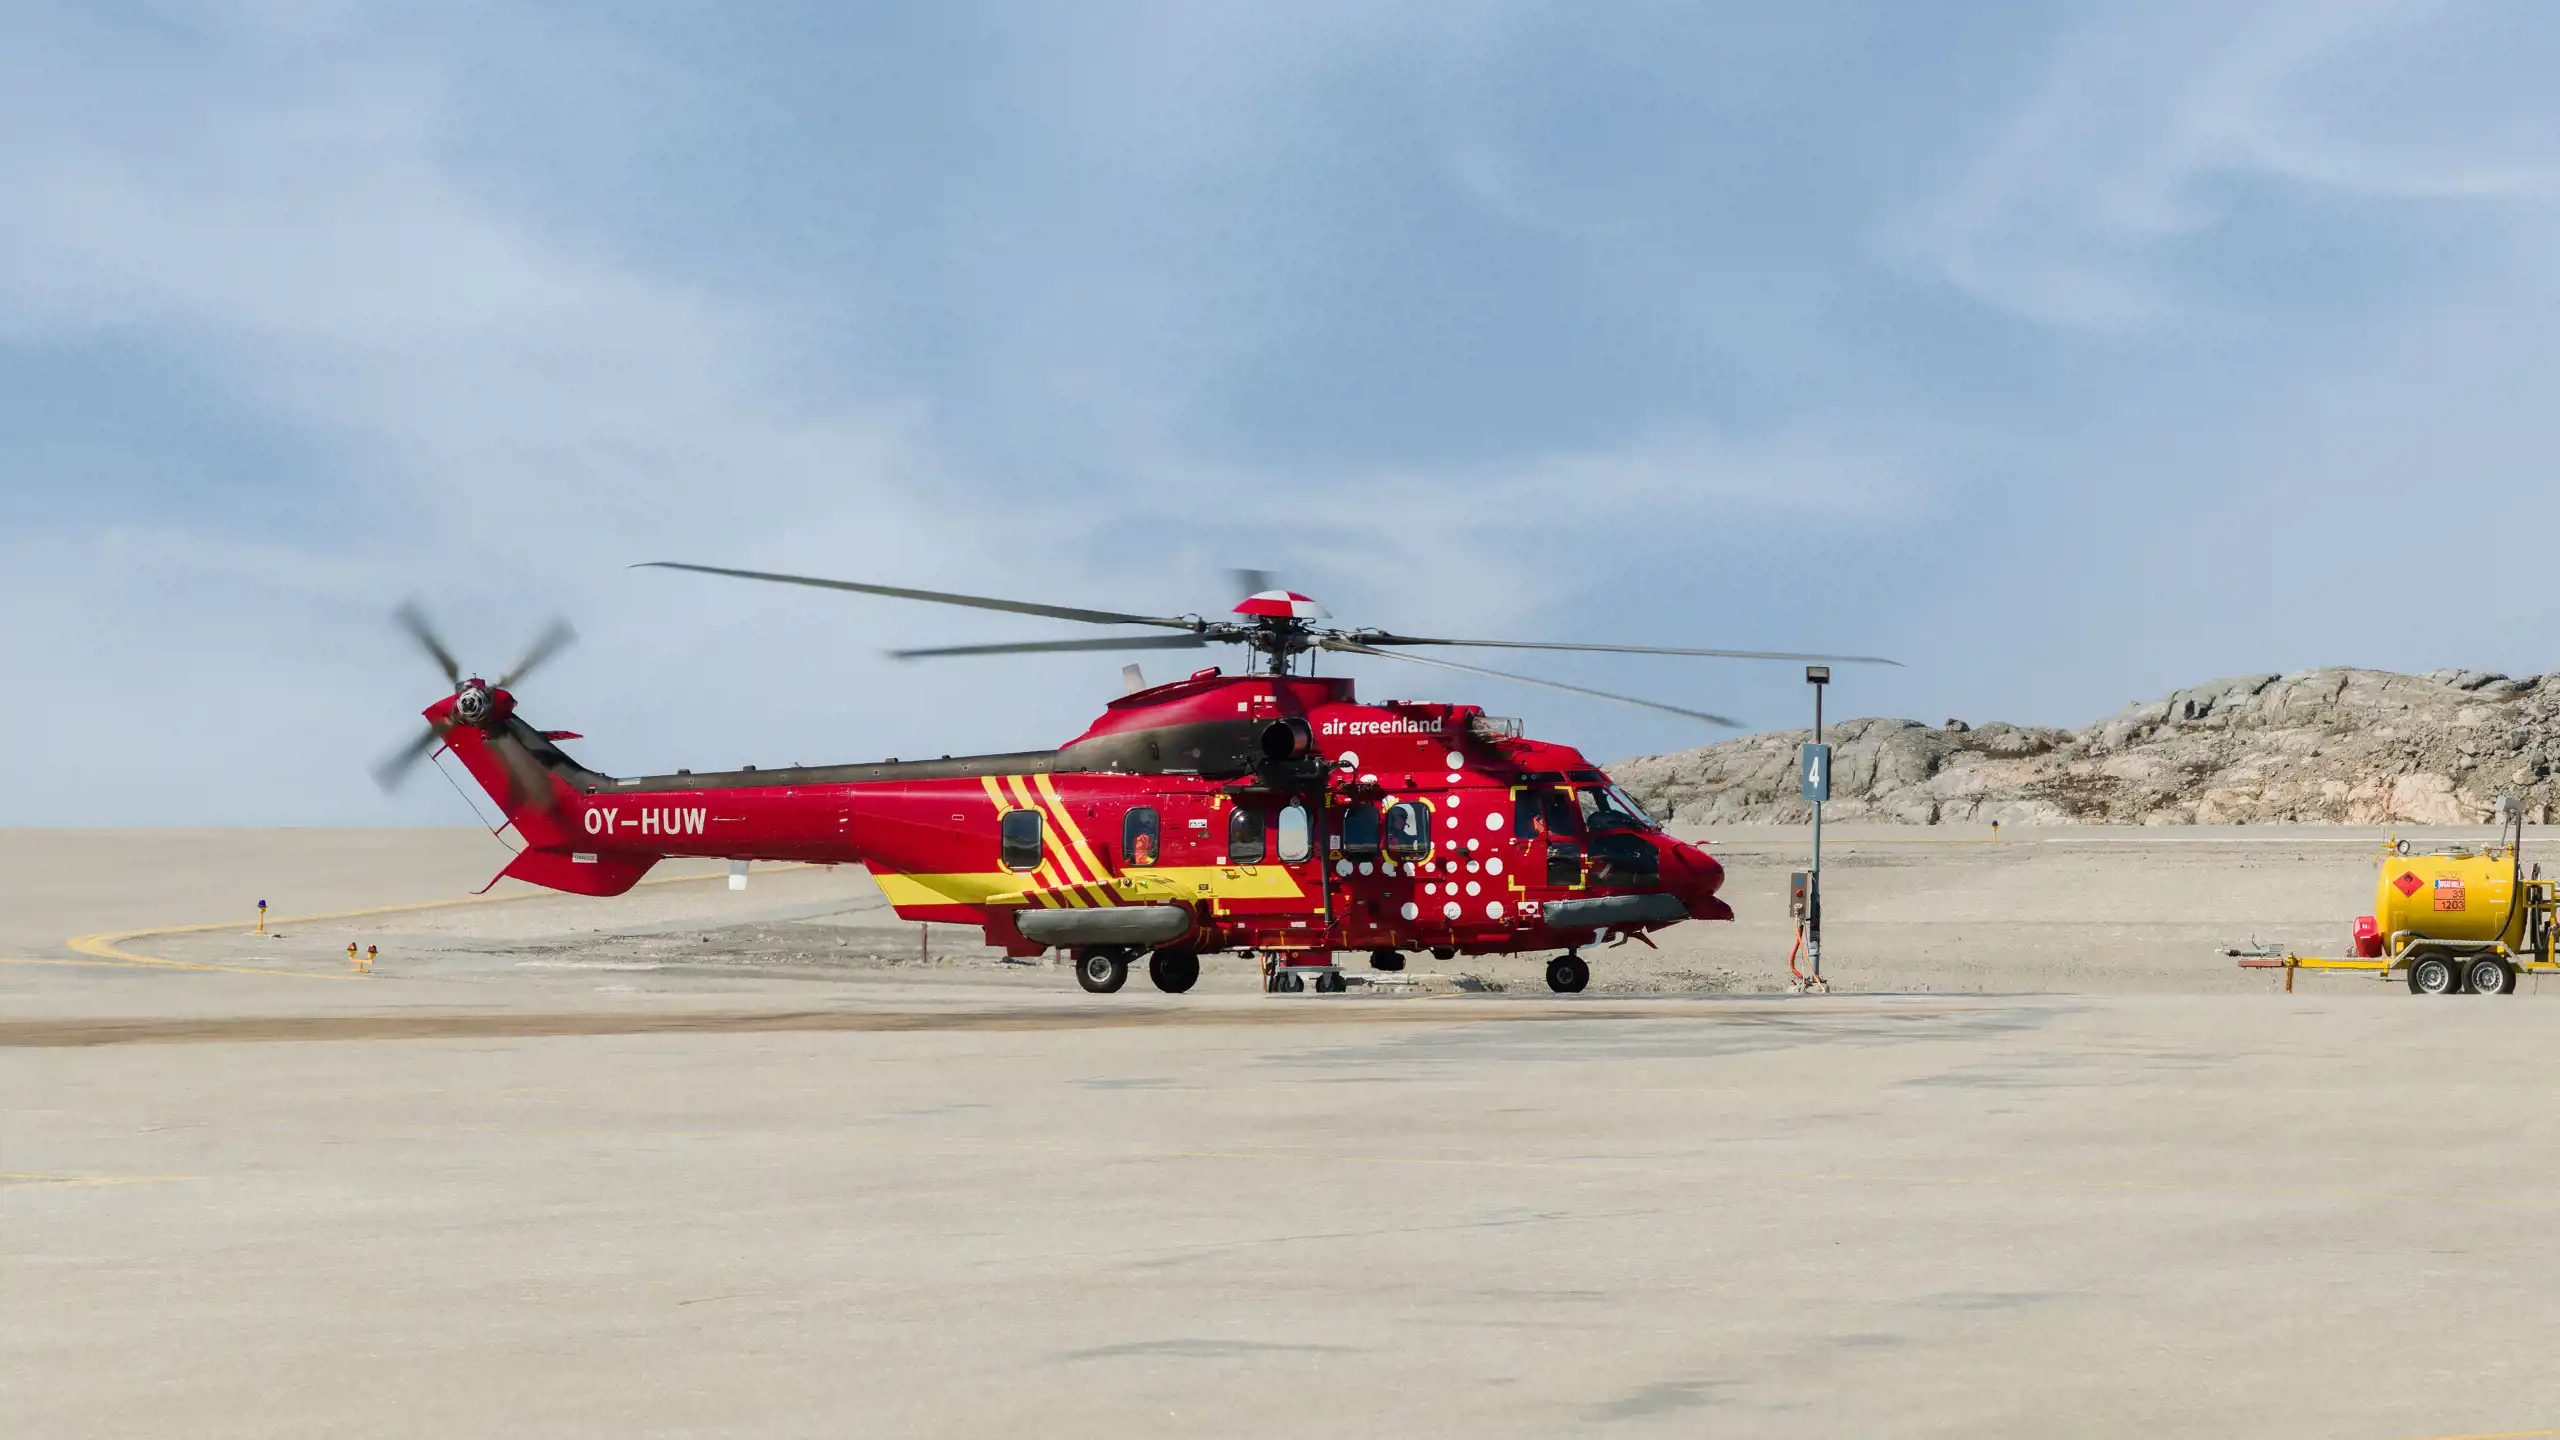 Air Greenland's rescue helicopter is also used in other emergencies such as ambulance flights or in charter missions.